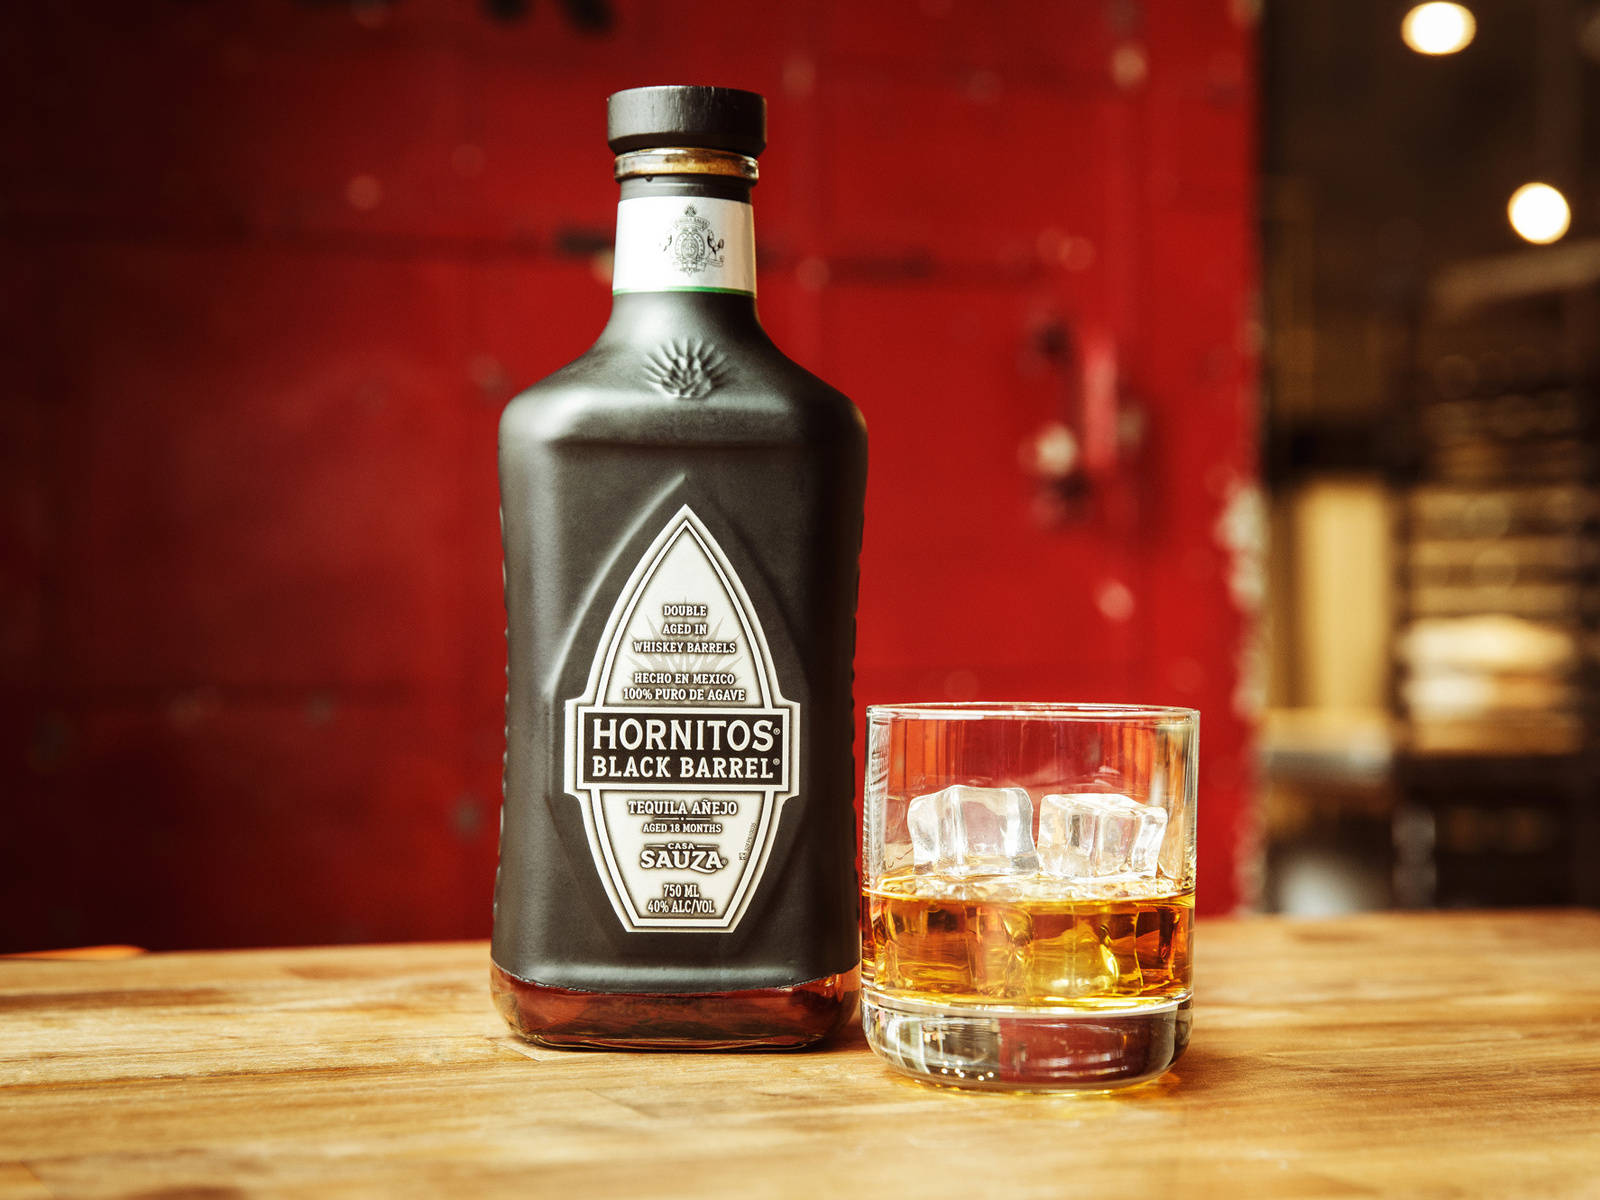 Hornitos Black Barrel Tequila On Wooden Table Wallpaper